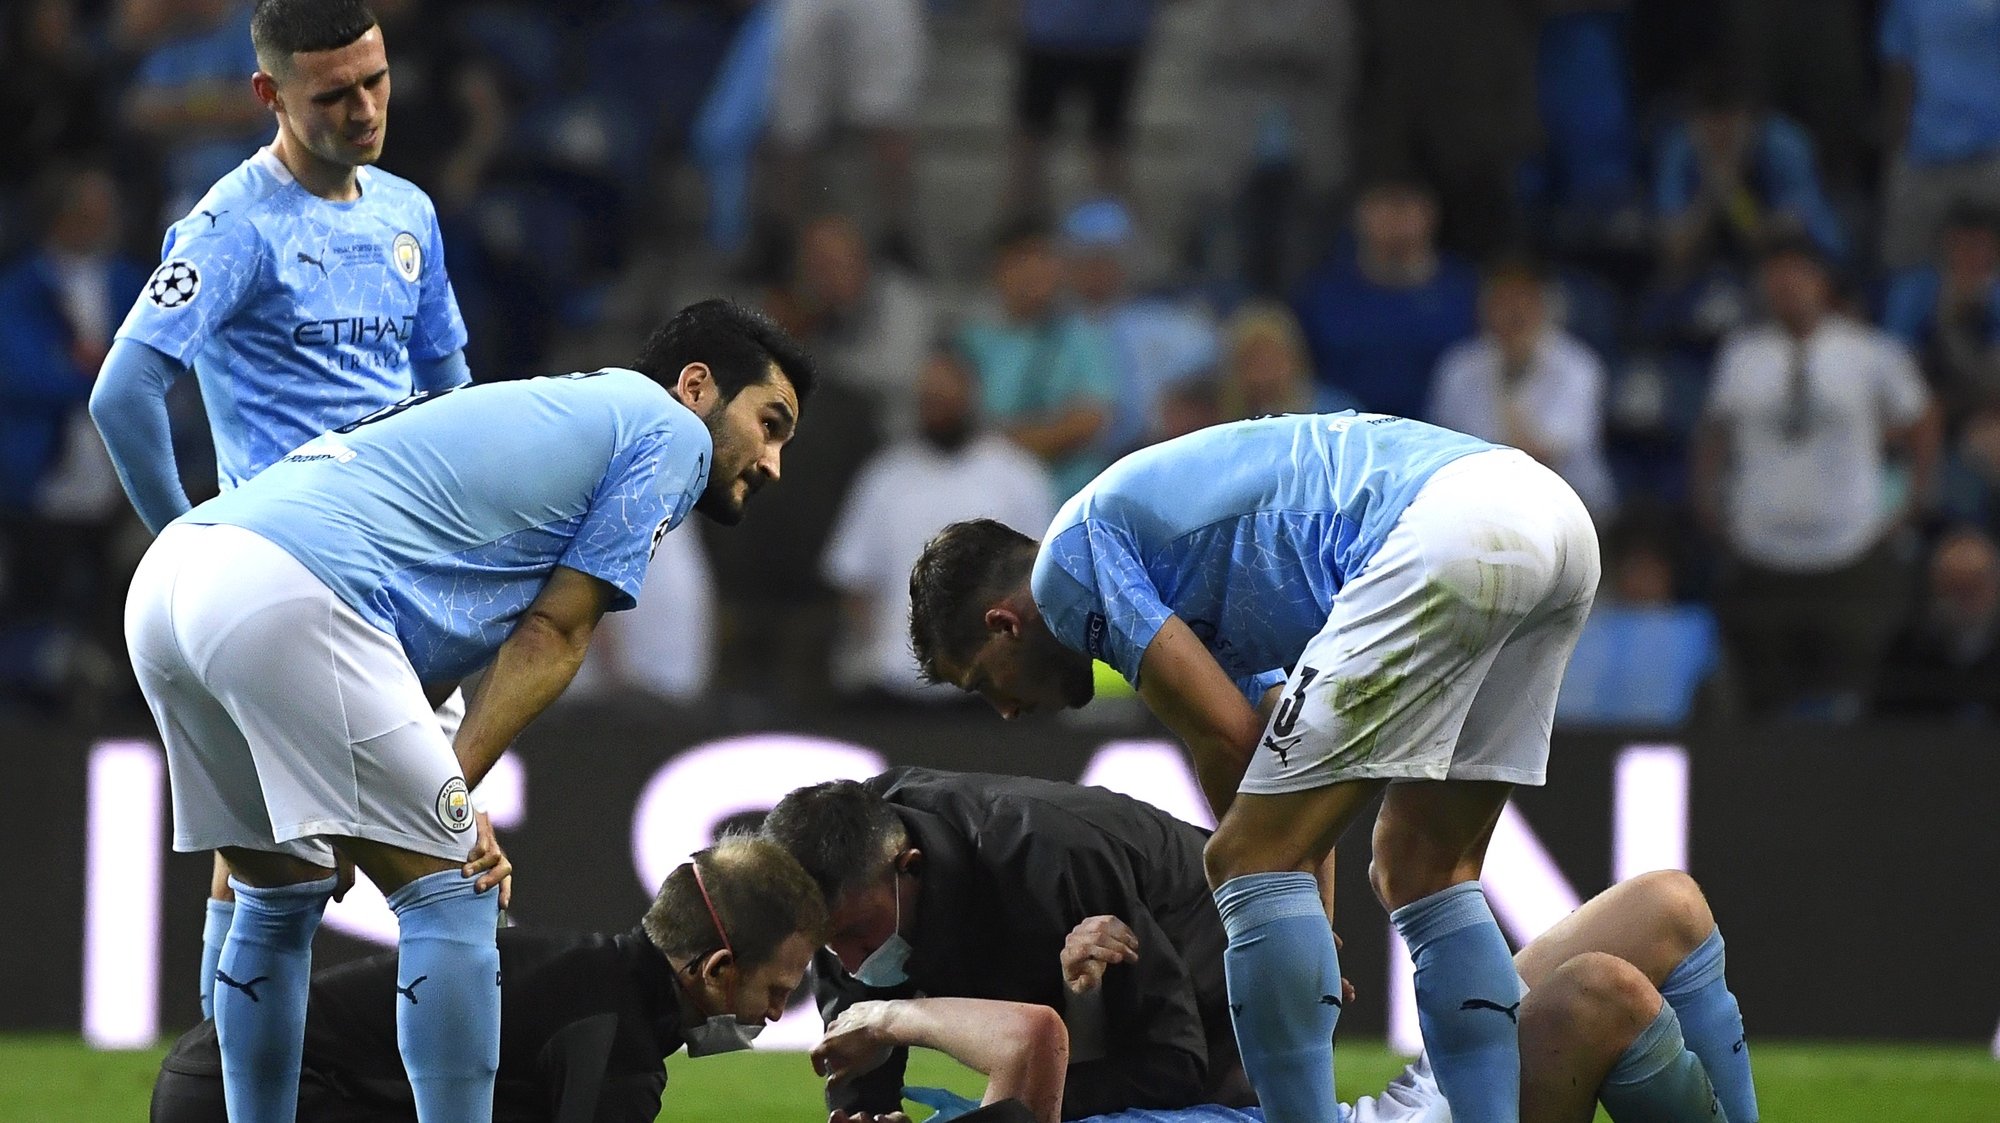 epa09235911 Kevin De Bruyne (bottom) of Manchester City receives medical assistance during the UEFA Champions League final between Manchester City and Chelsea FC in Porto, Portugal, 29 May 2021.  EPA/Jose Coelho / POOL